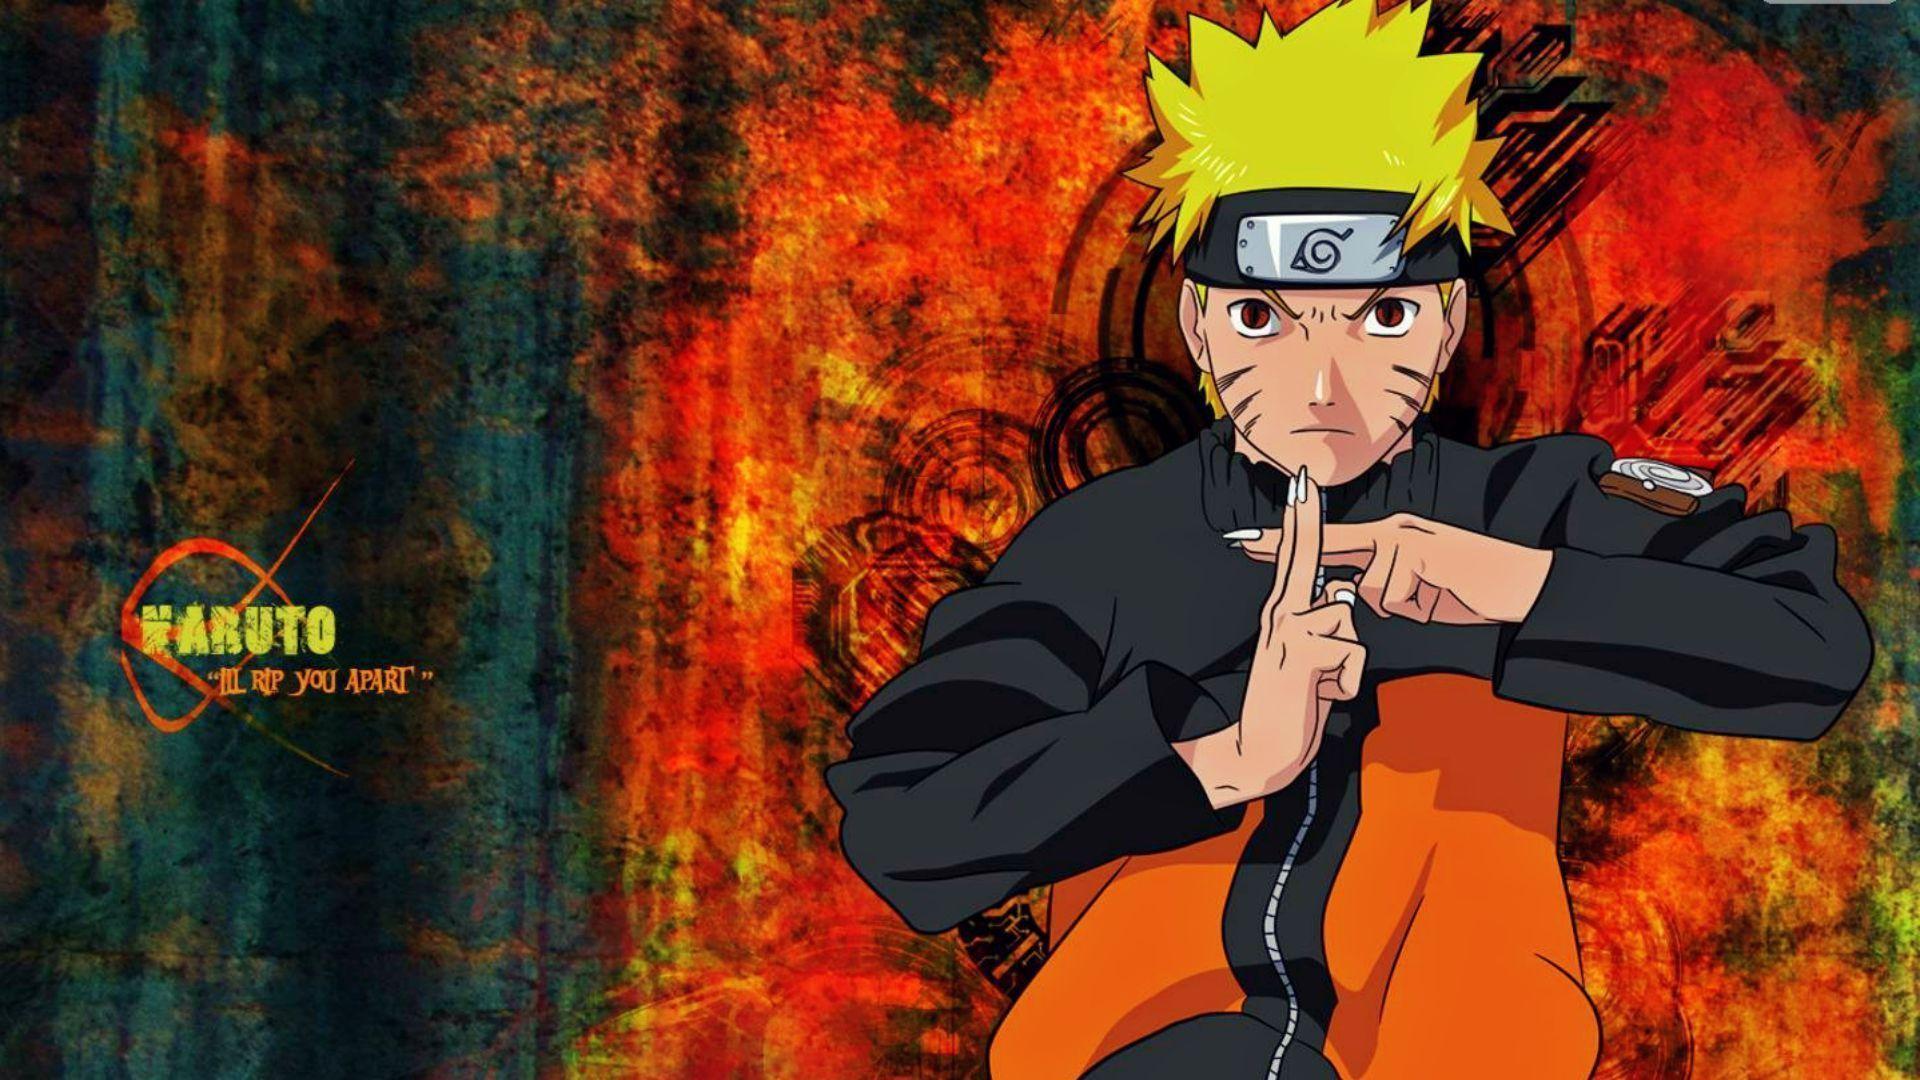 Wallpapers For > Naruto Wallpapers Hd 1080p